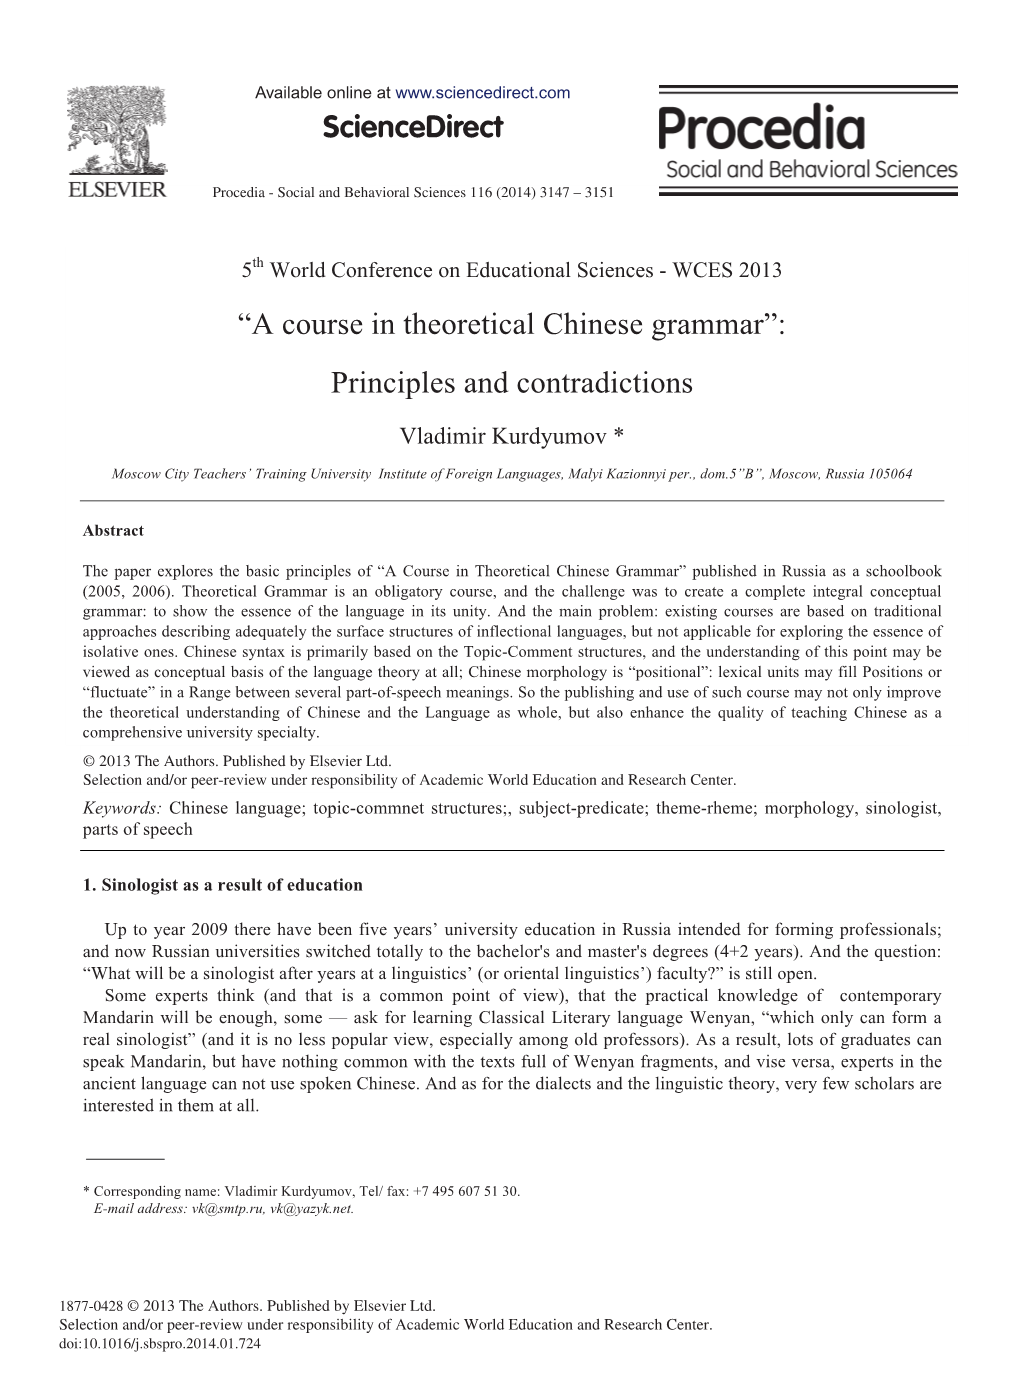 A Course in Theoretical Chinese Grammar”: Principles and Contradictions